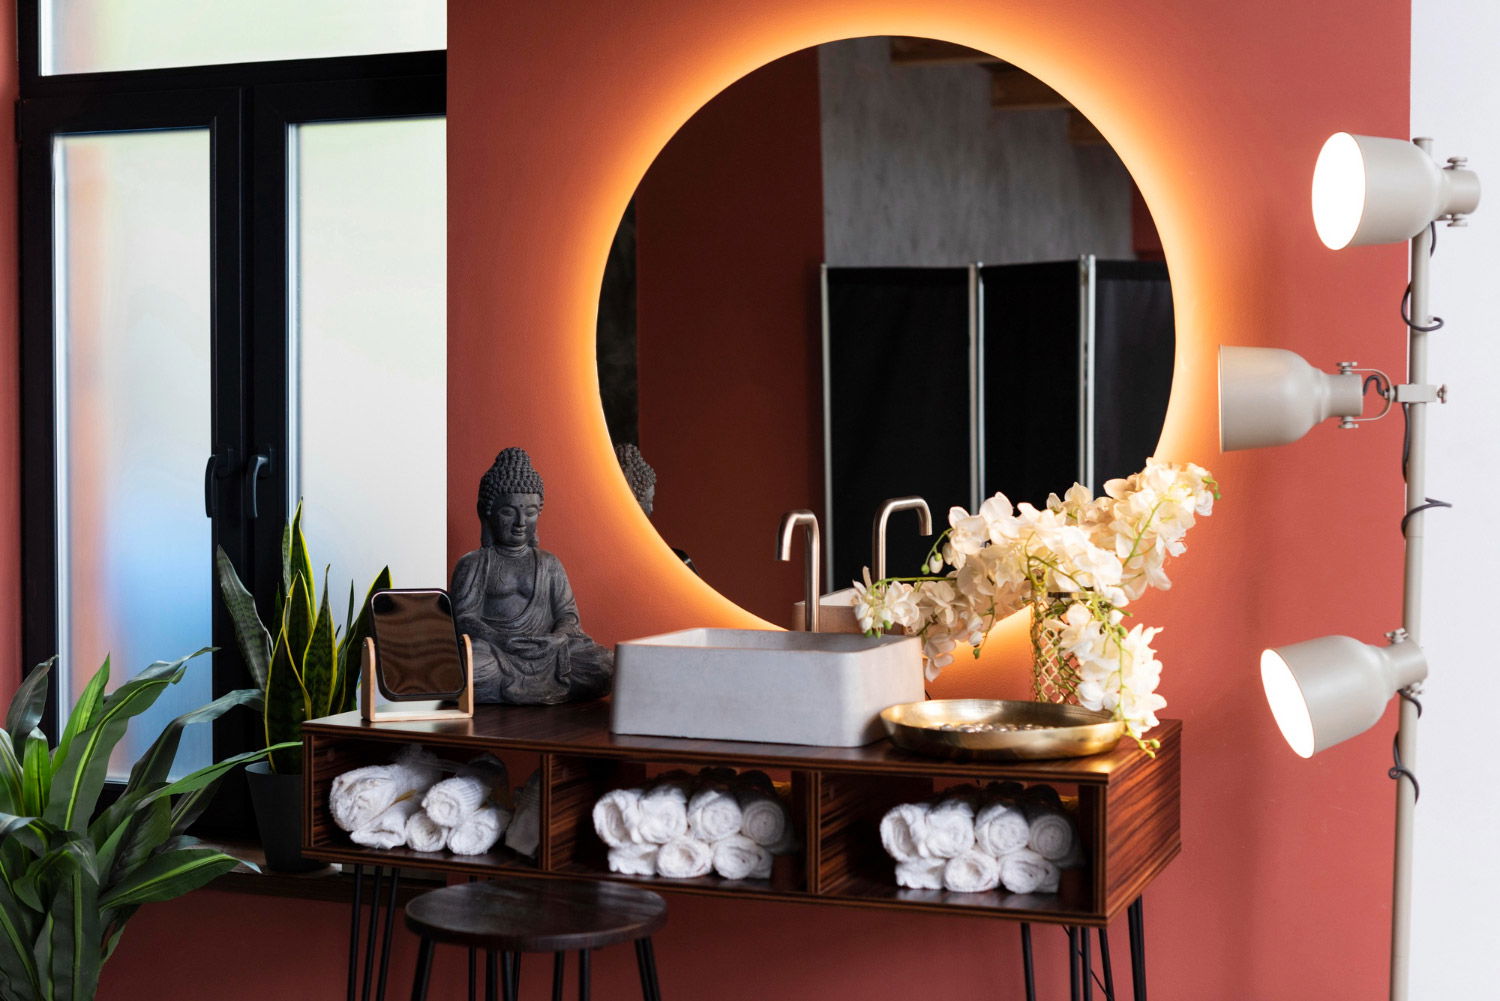 A bathroom with a round mirror and a lamp.